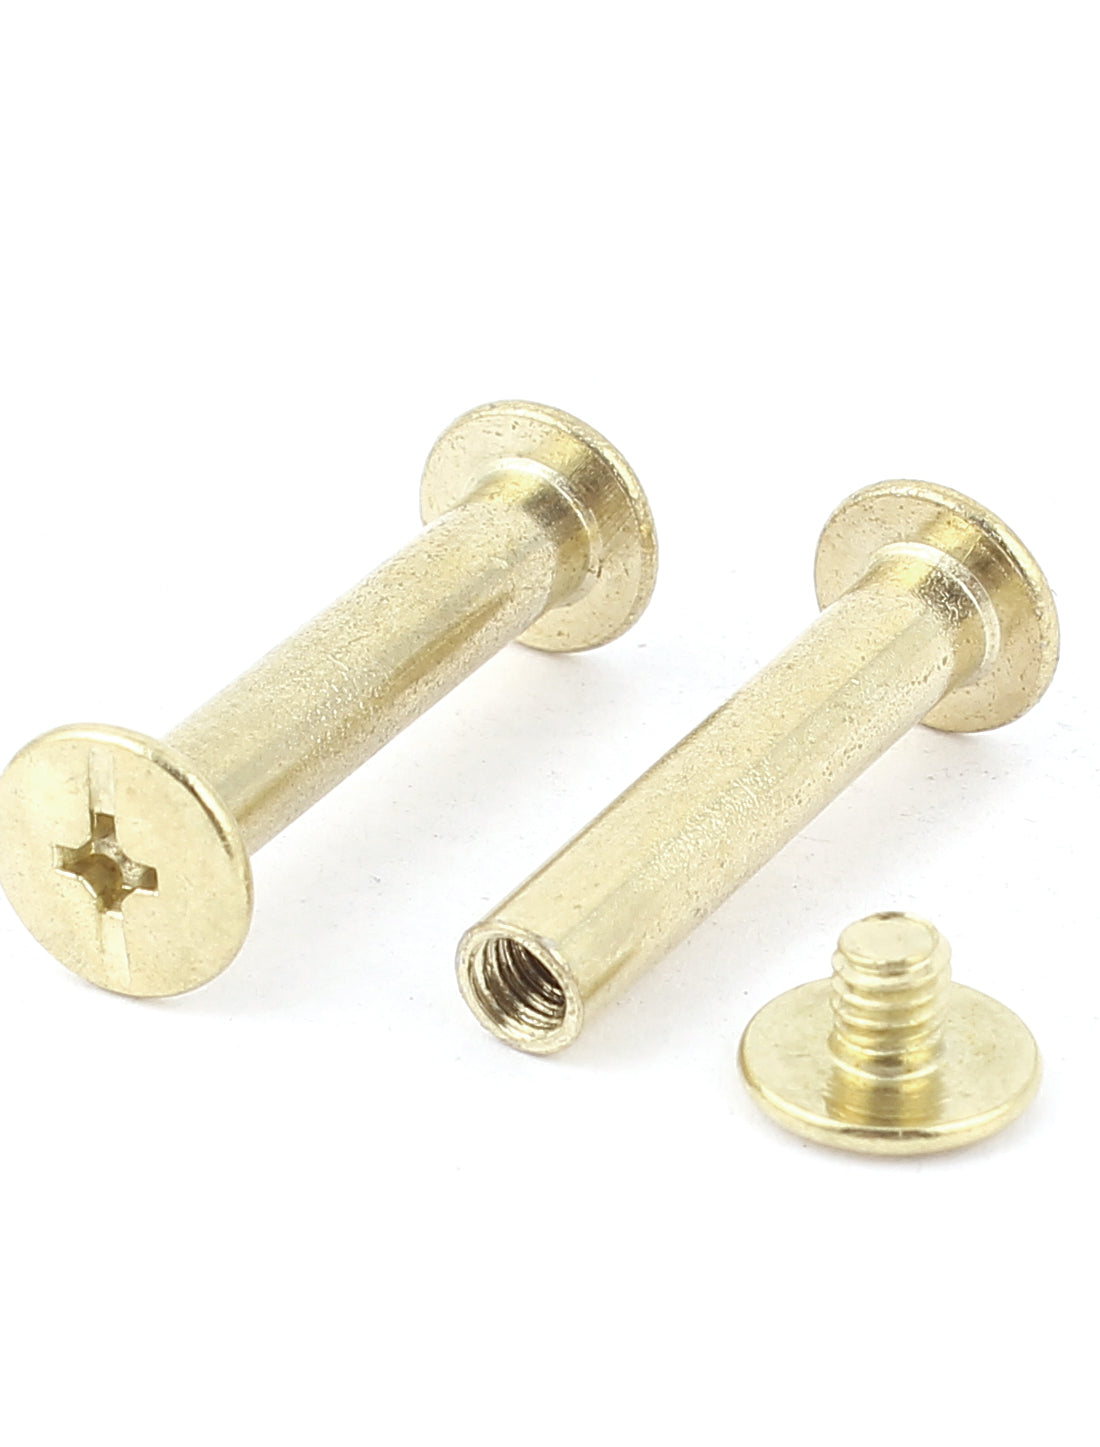 uxcell Uxcell 10pcs 5mm x 25mm Brass Plated Binding Chicago Screw Post for Album Scrapbook